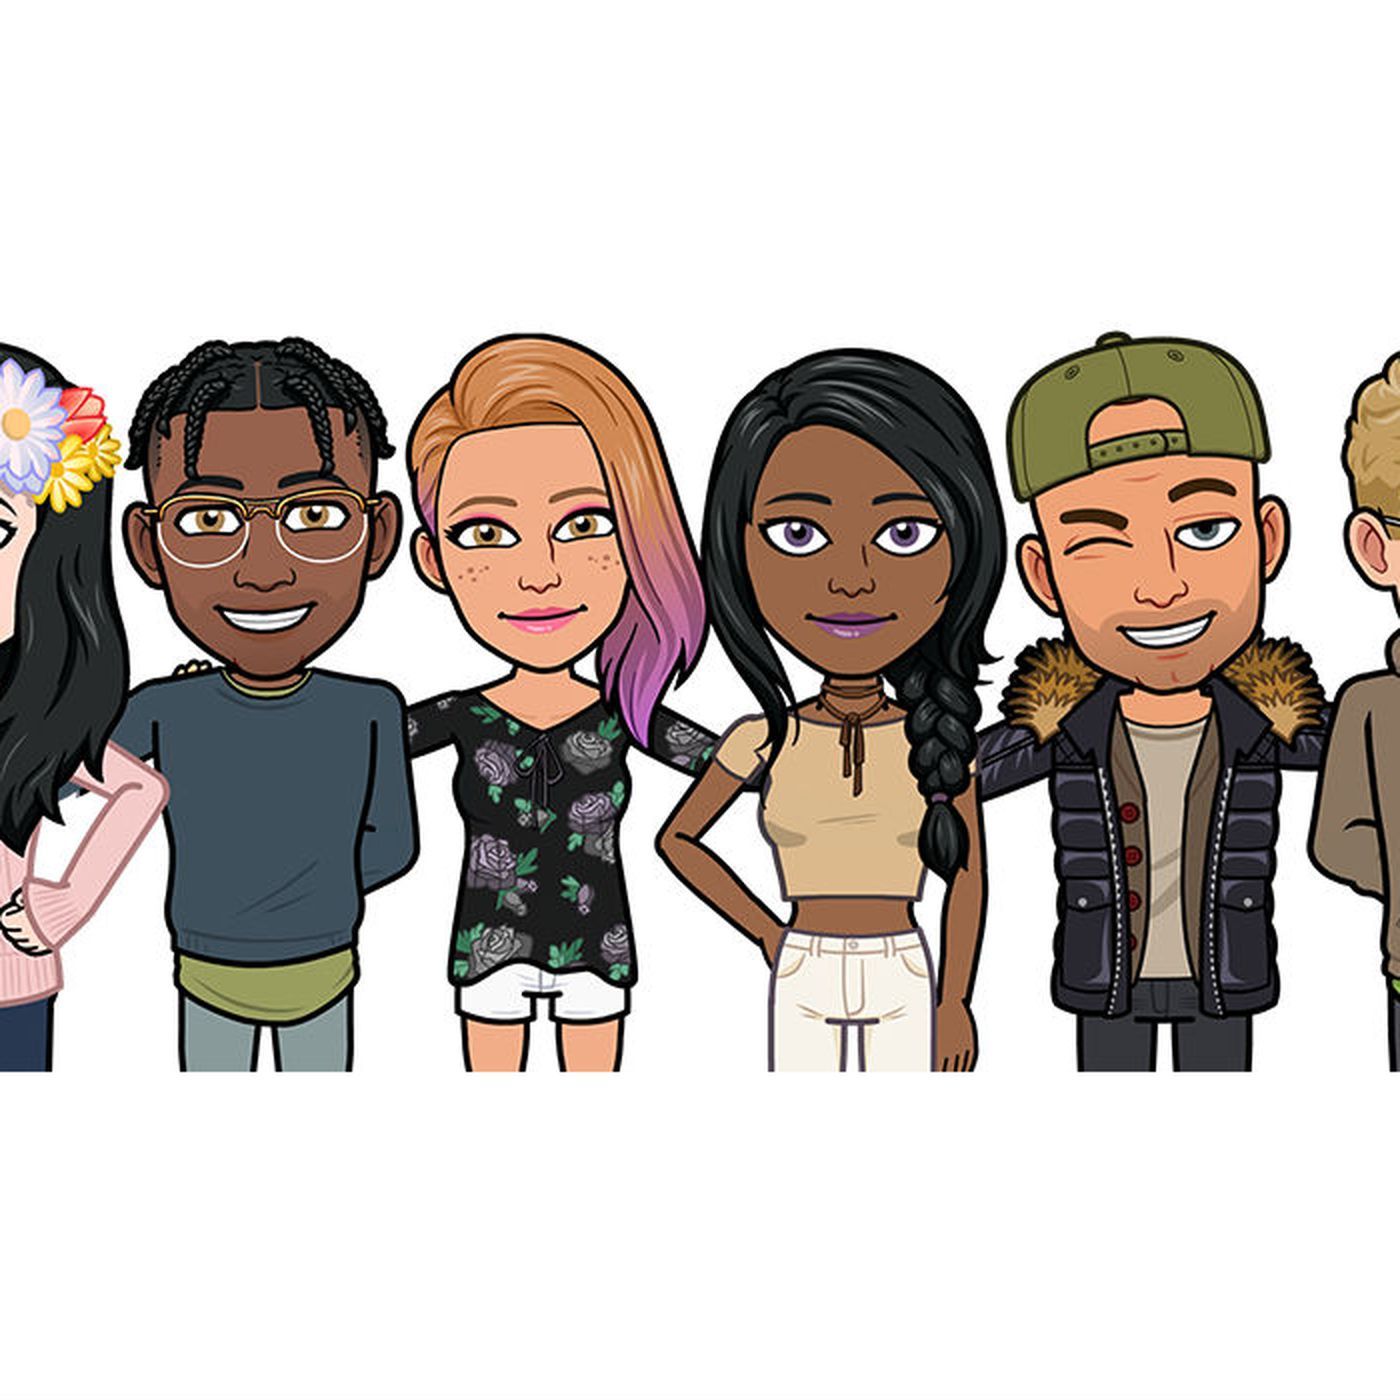 Snapchat takes Bitmoji deluxe with hundreds of new customization options